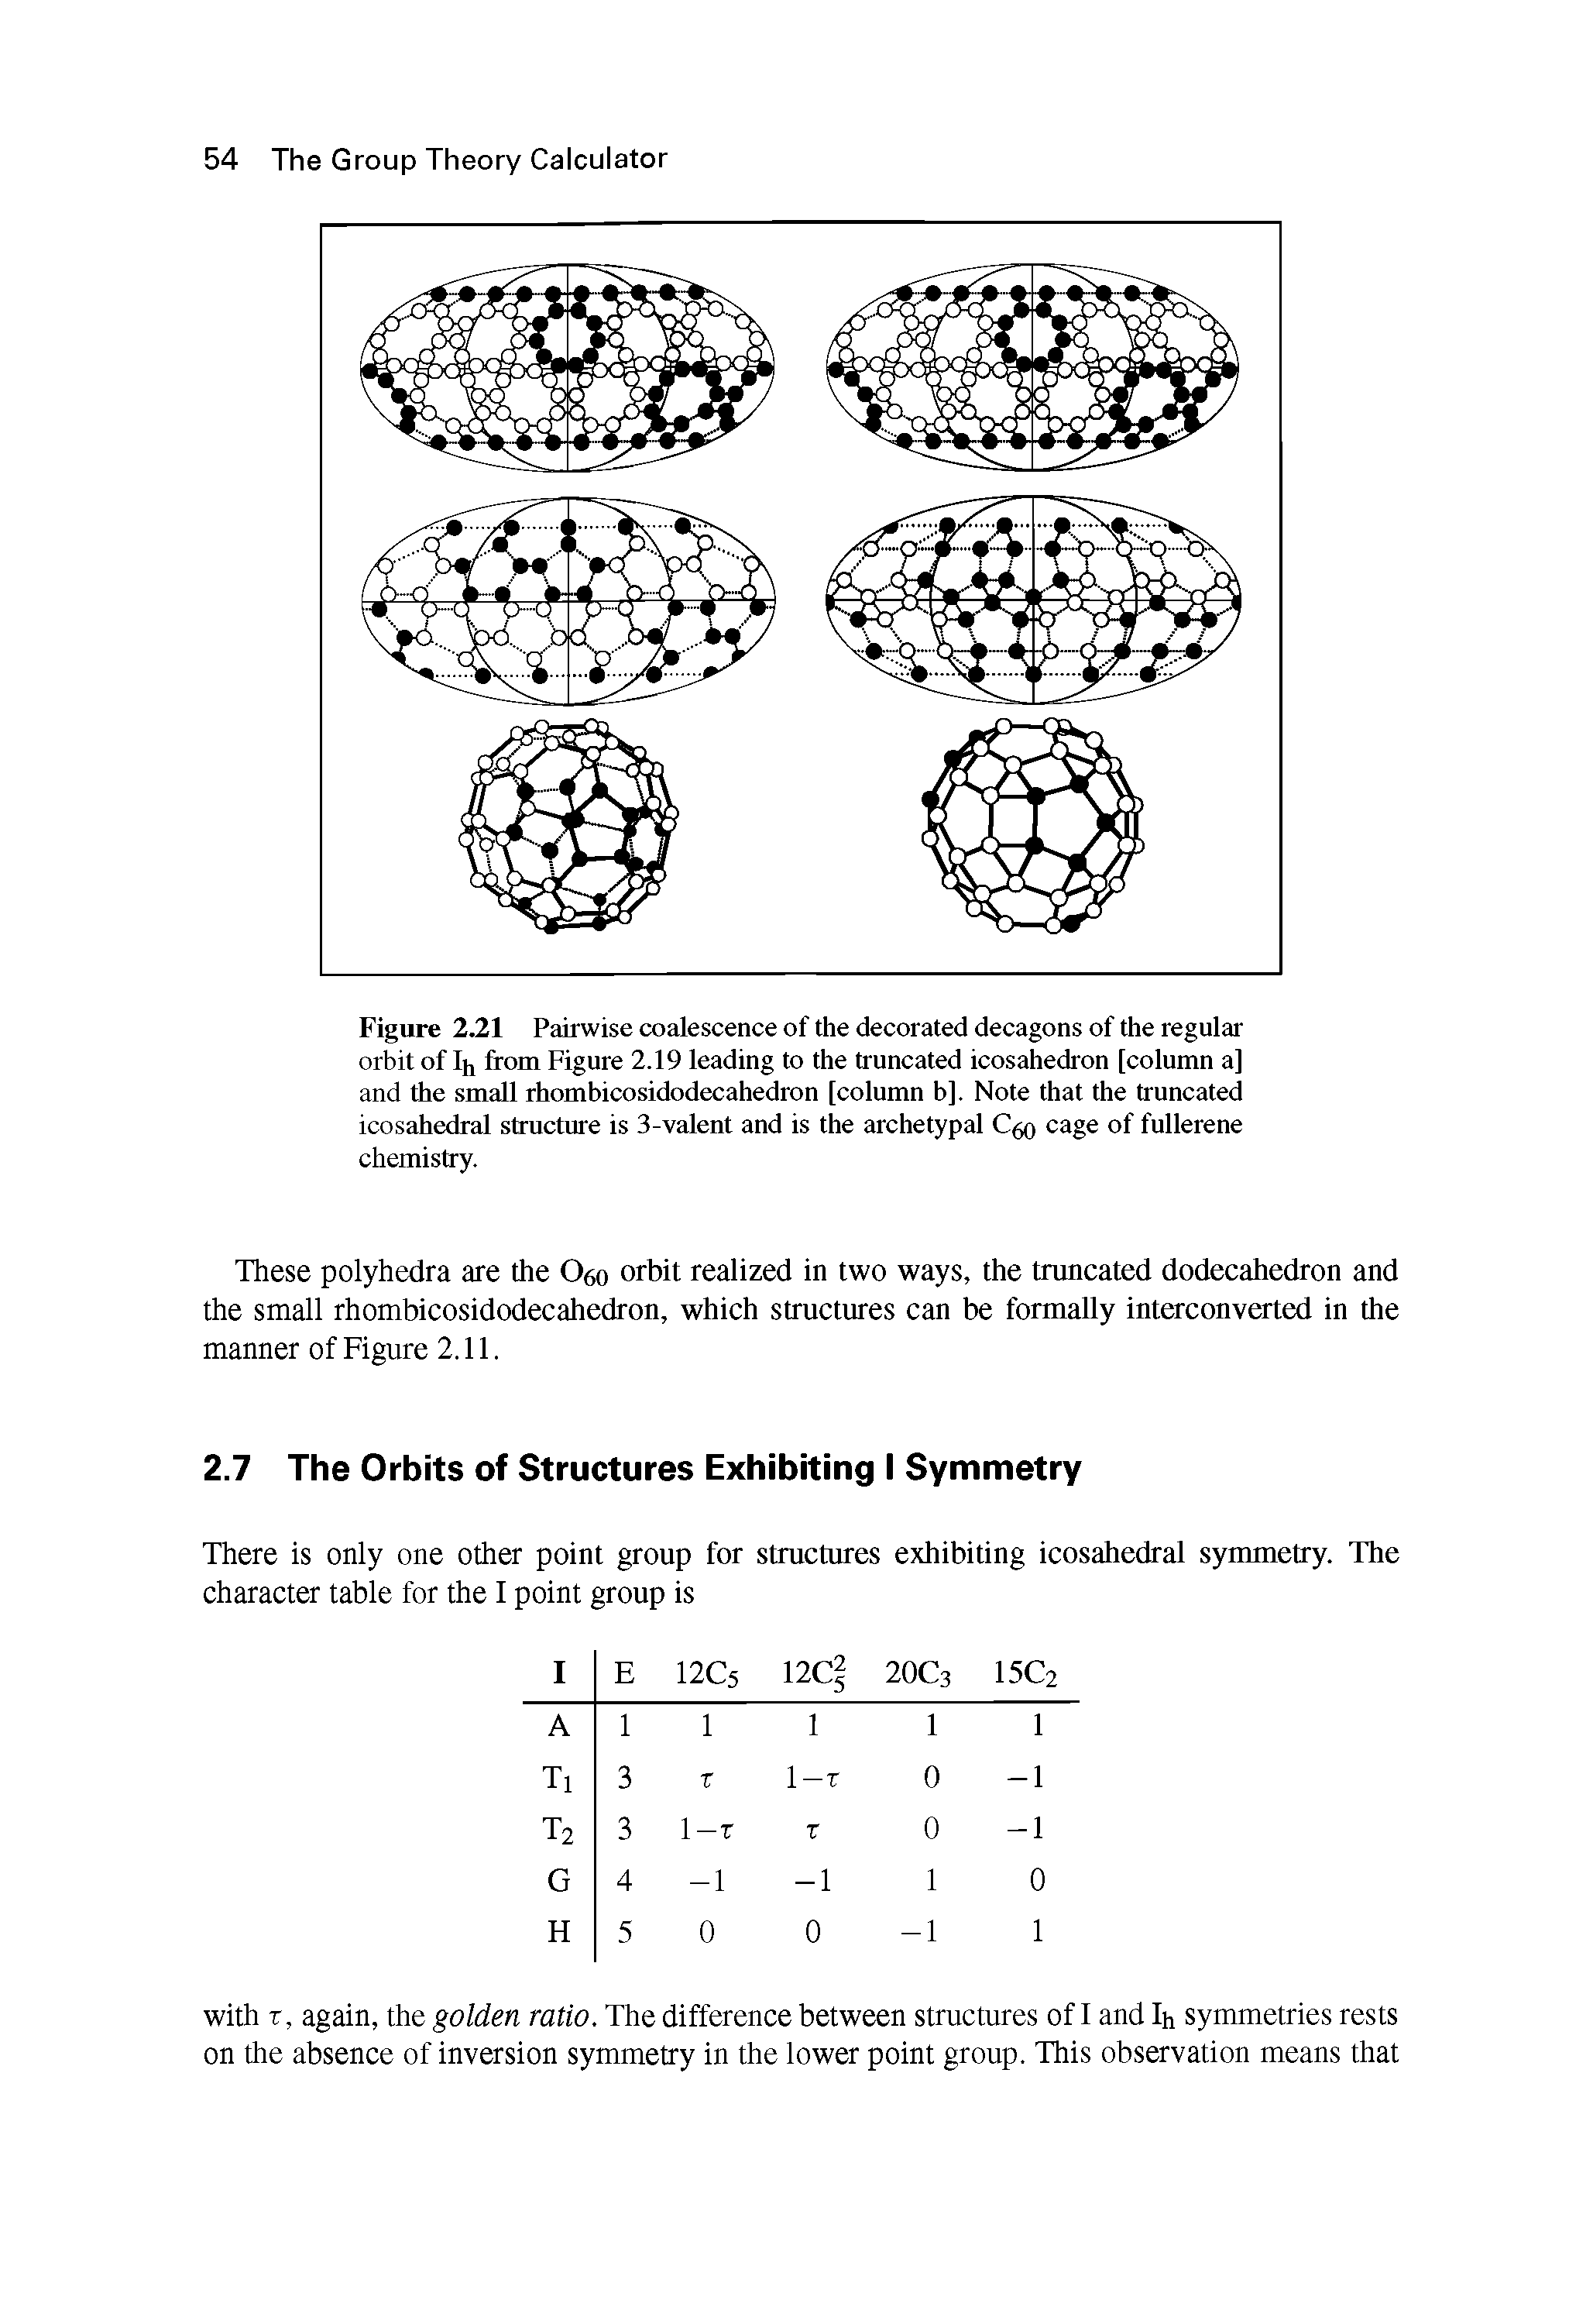 Figure 2.21 Pairwise coalescence of the decorated decagons of the regular orbit of 111 from Figure 2.19 leading to the truncated icosahedron [column a] and the small rhombicosidodecahedron [column b]. Note that the truncated icosahedral structure is 3-valent and is the archetypal C q cage of fullerene chemistry.